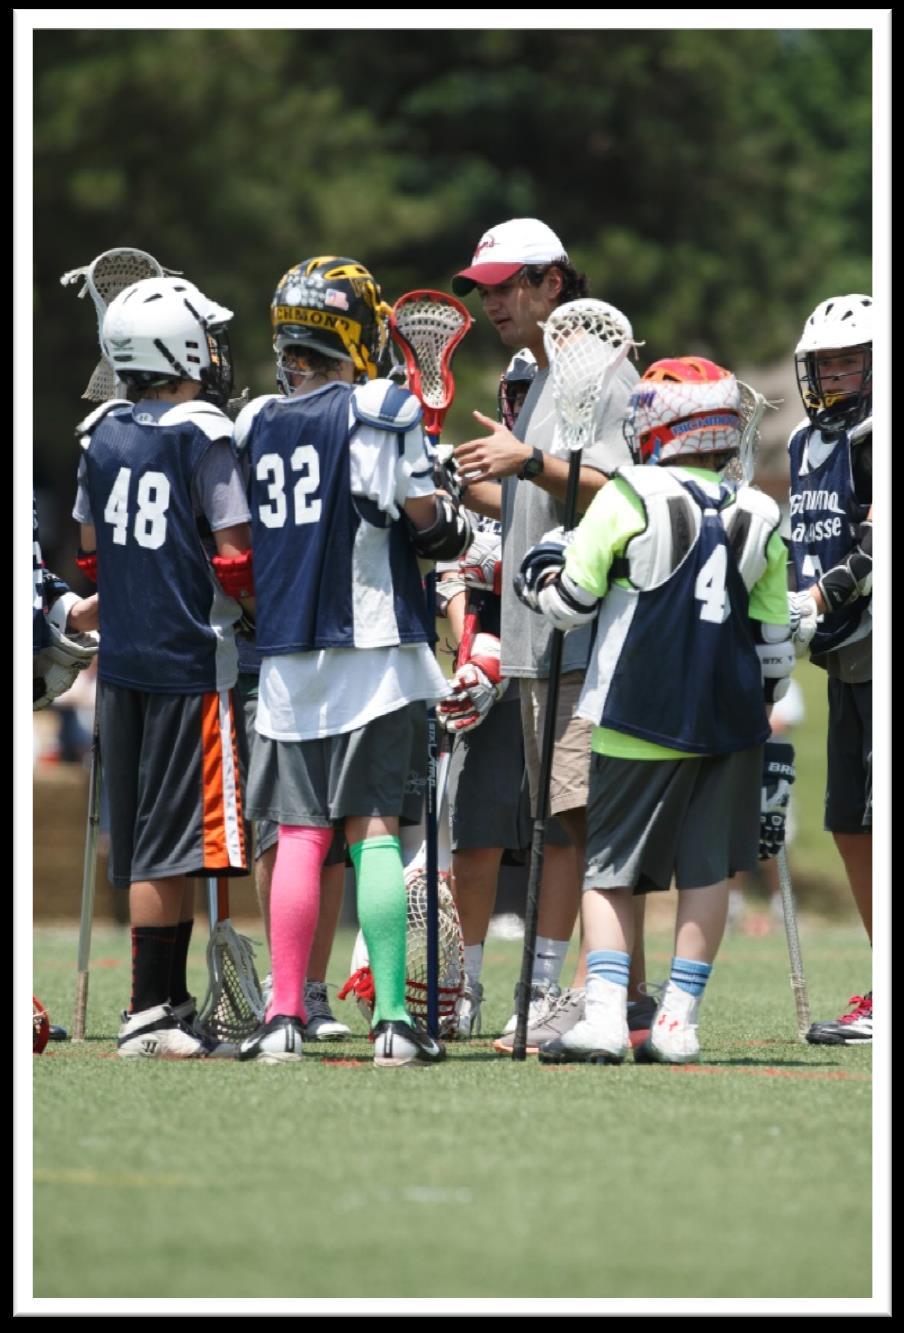 Substitutions Coaches will conduct a whole-team substitution prior to a face-off or during other deadball situations.